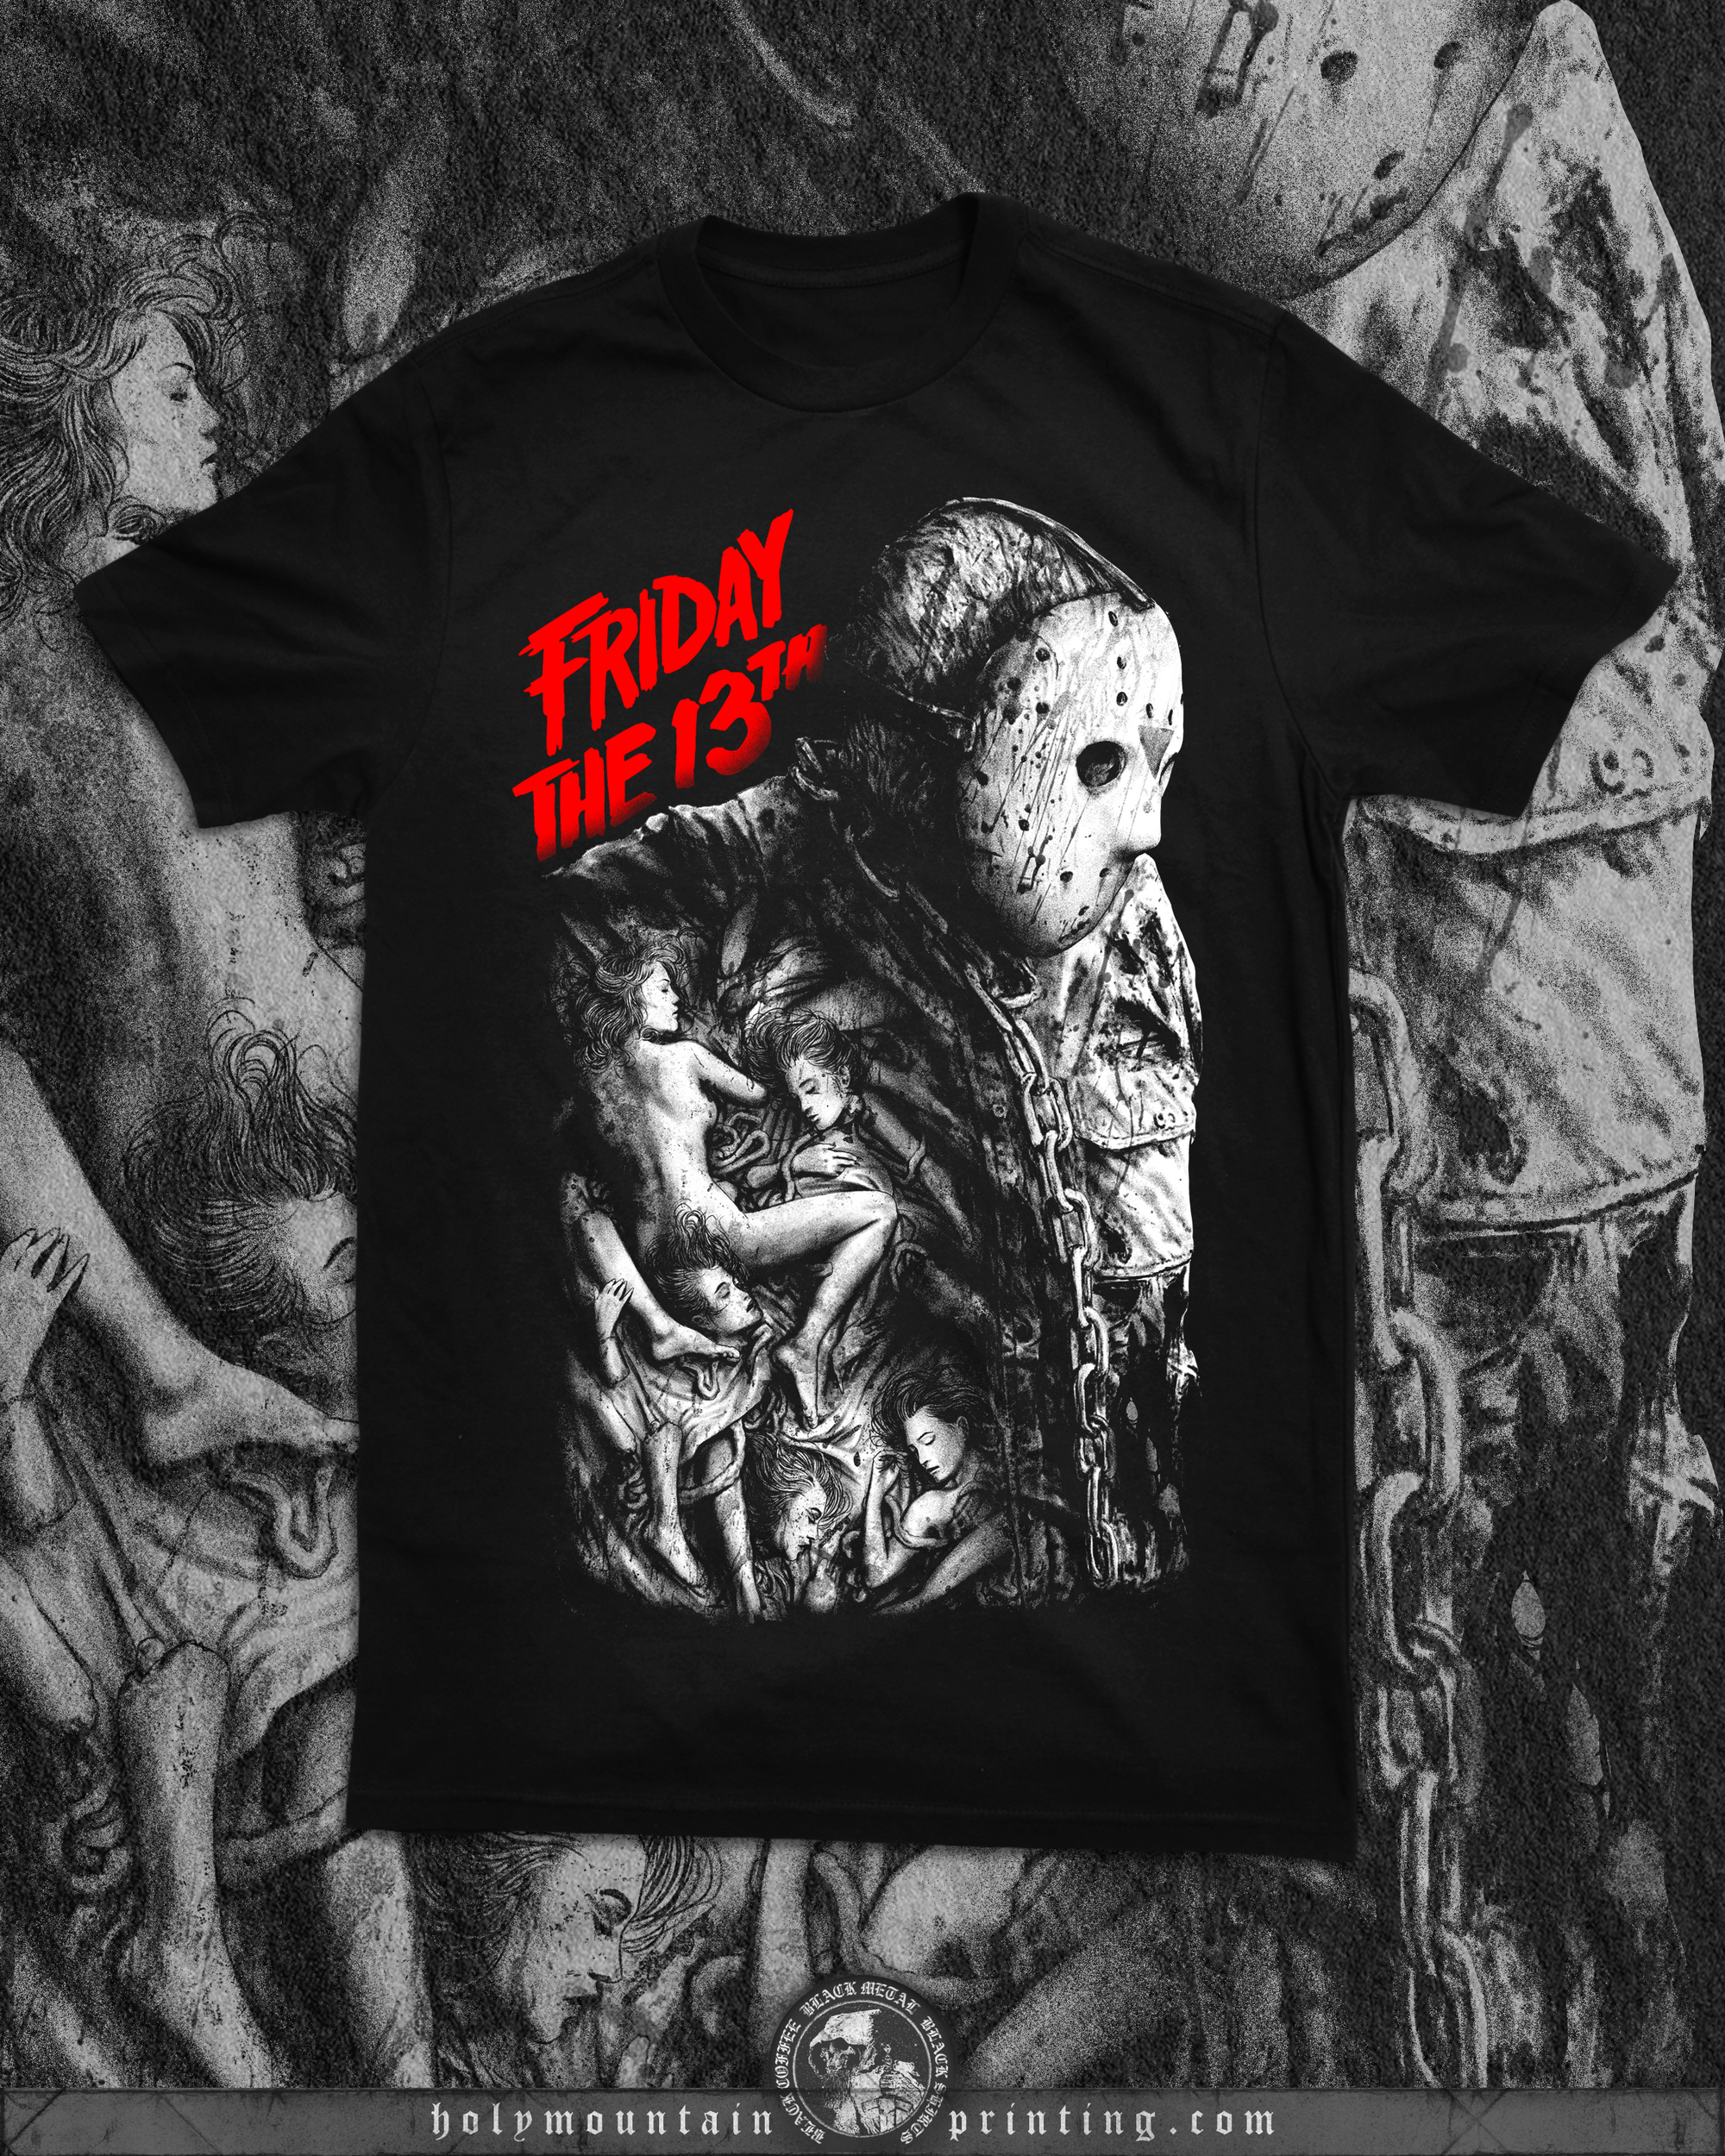 ABACROMBIE INK "FRIDAY THE 13th" SHIRT (PRE-ORDER)